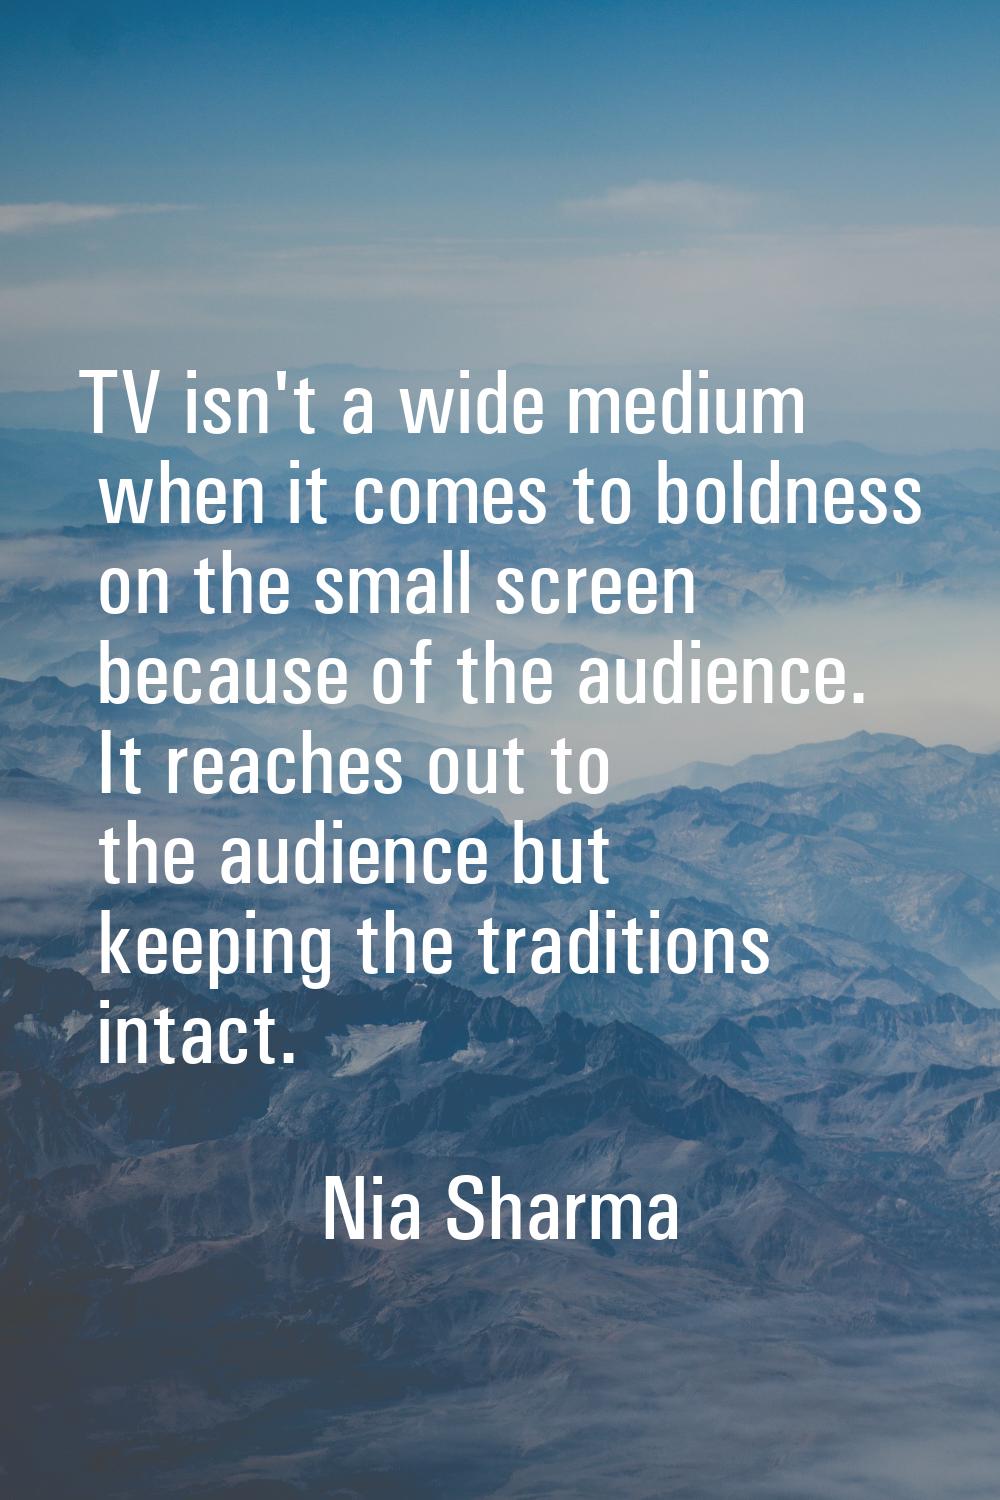 TV isn't a wide medium when it comes to boldness on the small screen because of the audience. It re